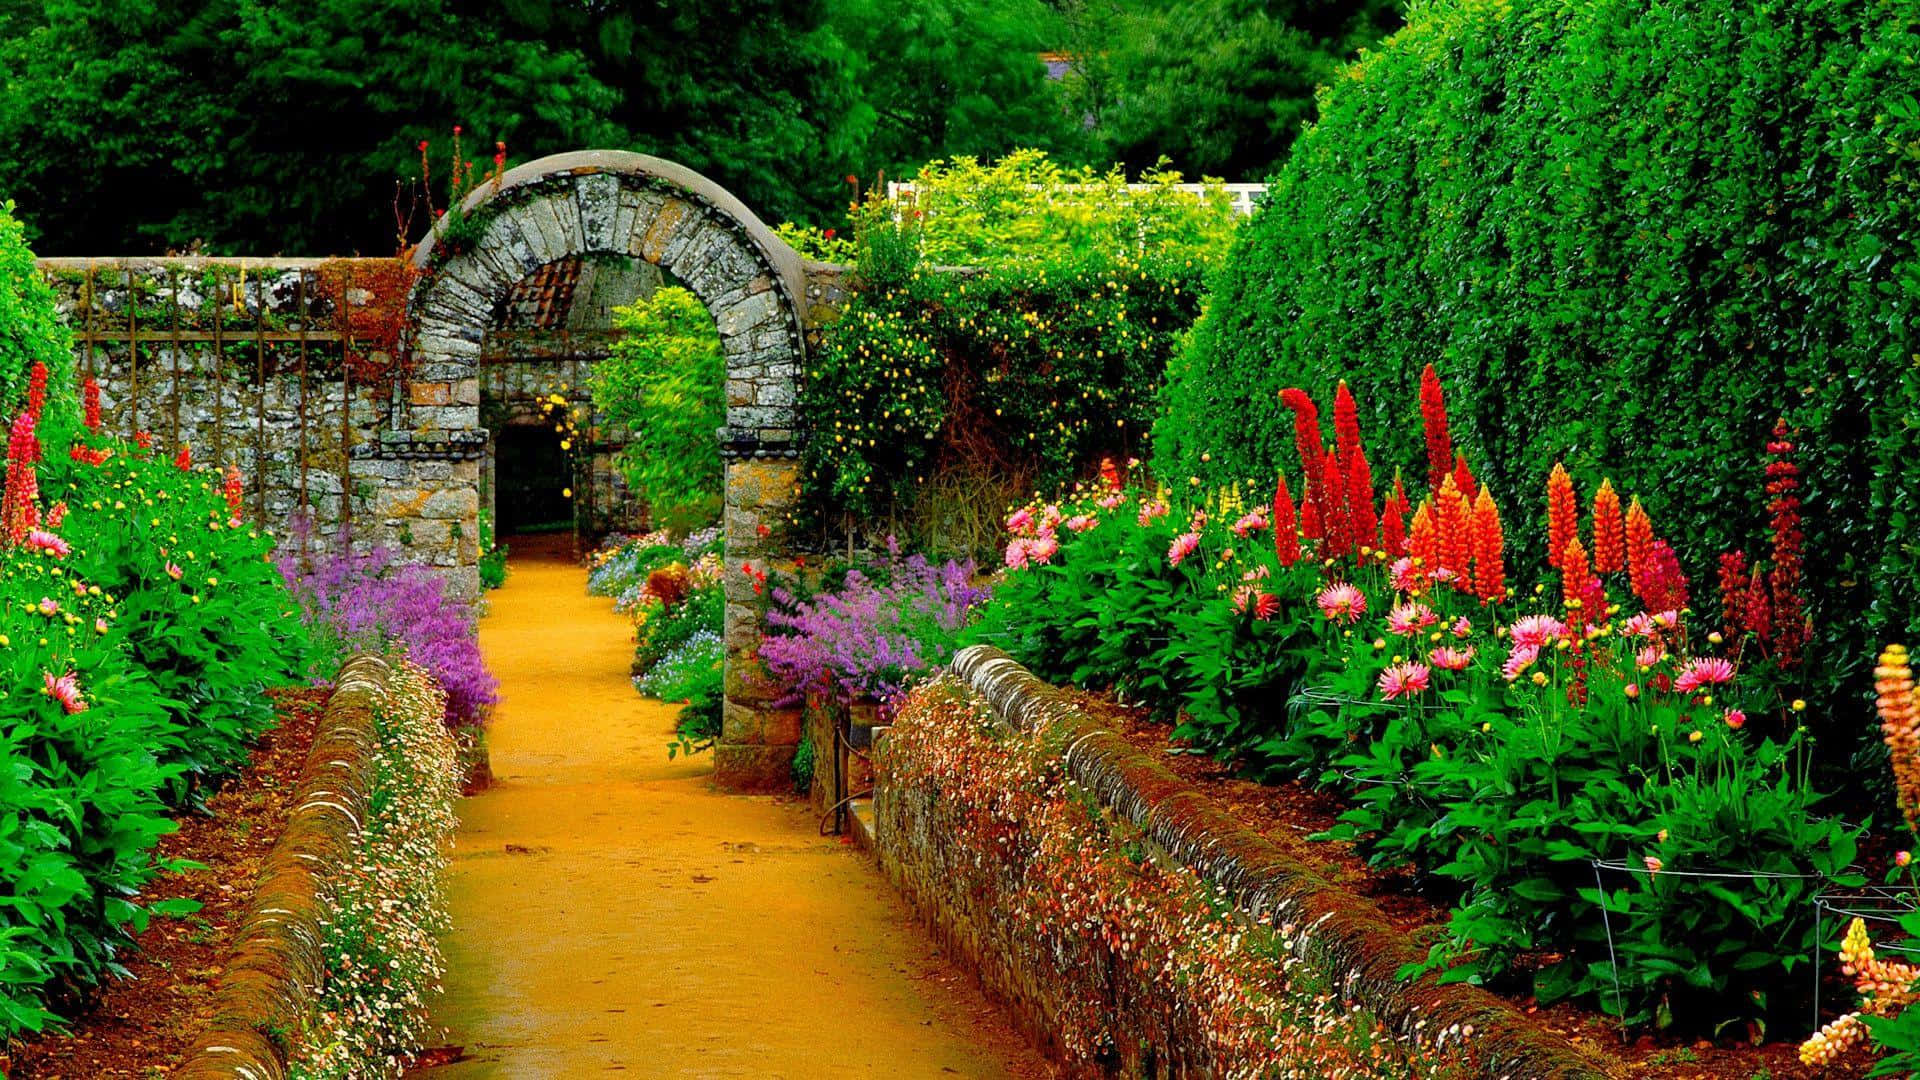 A Pathway With Flowers And Bushes